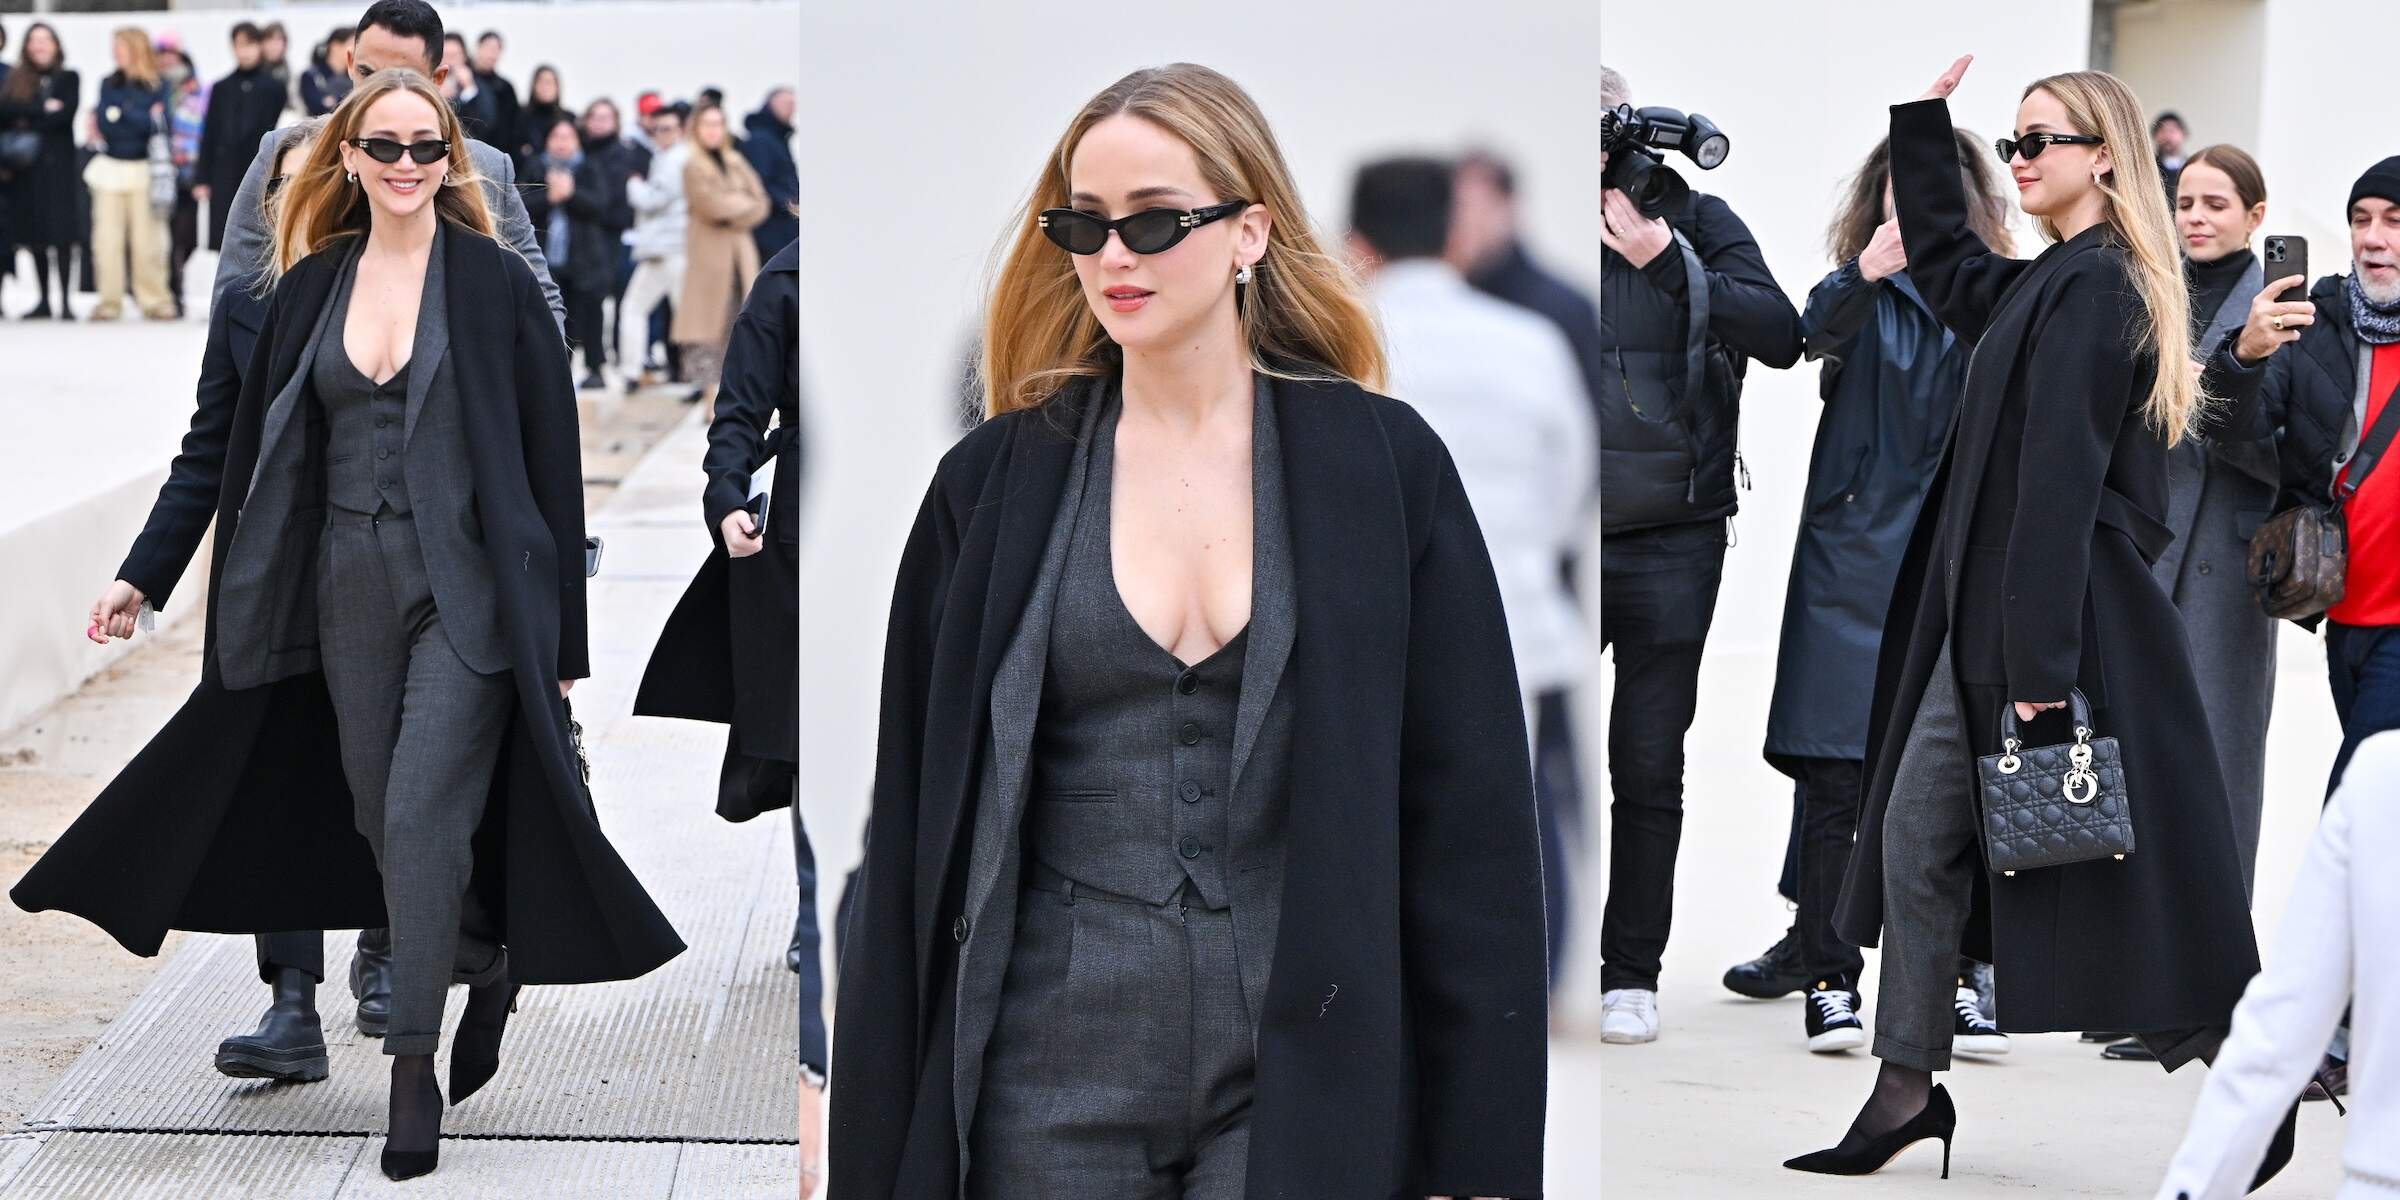 Actress Jennifer Lawrence wears a business-inspired black and gray outfit while walking to the Christian Dior fashion show in Paris, France